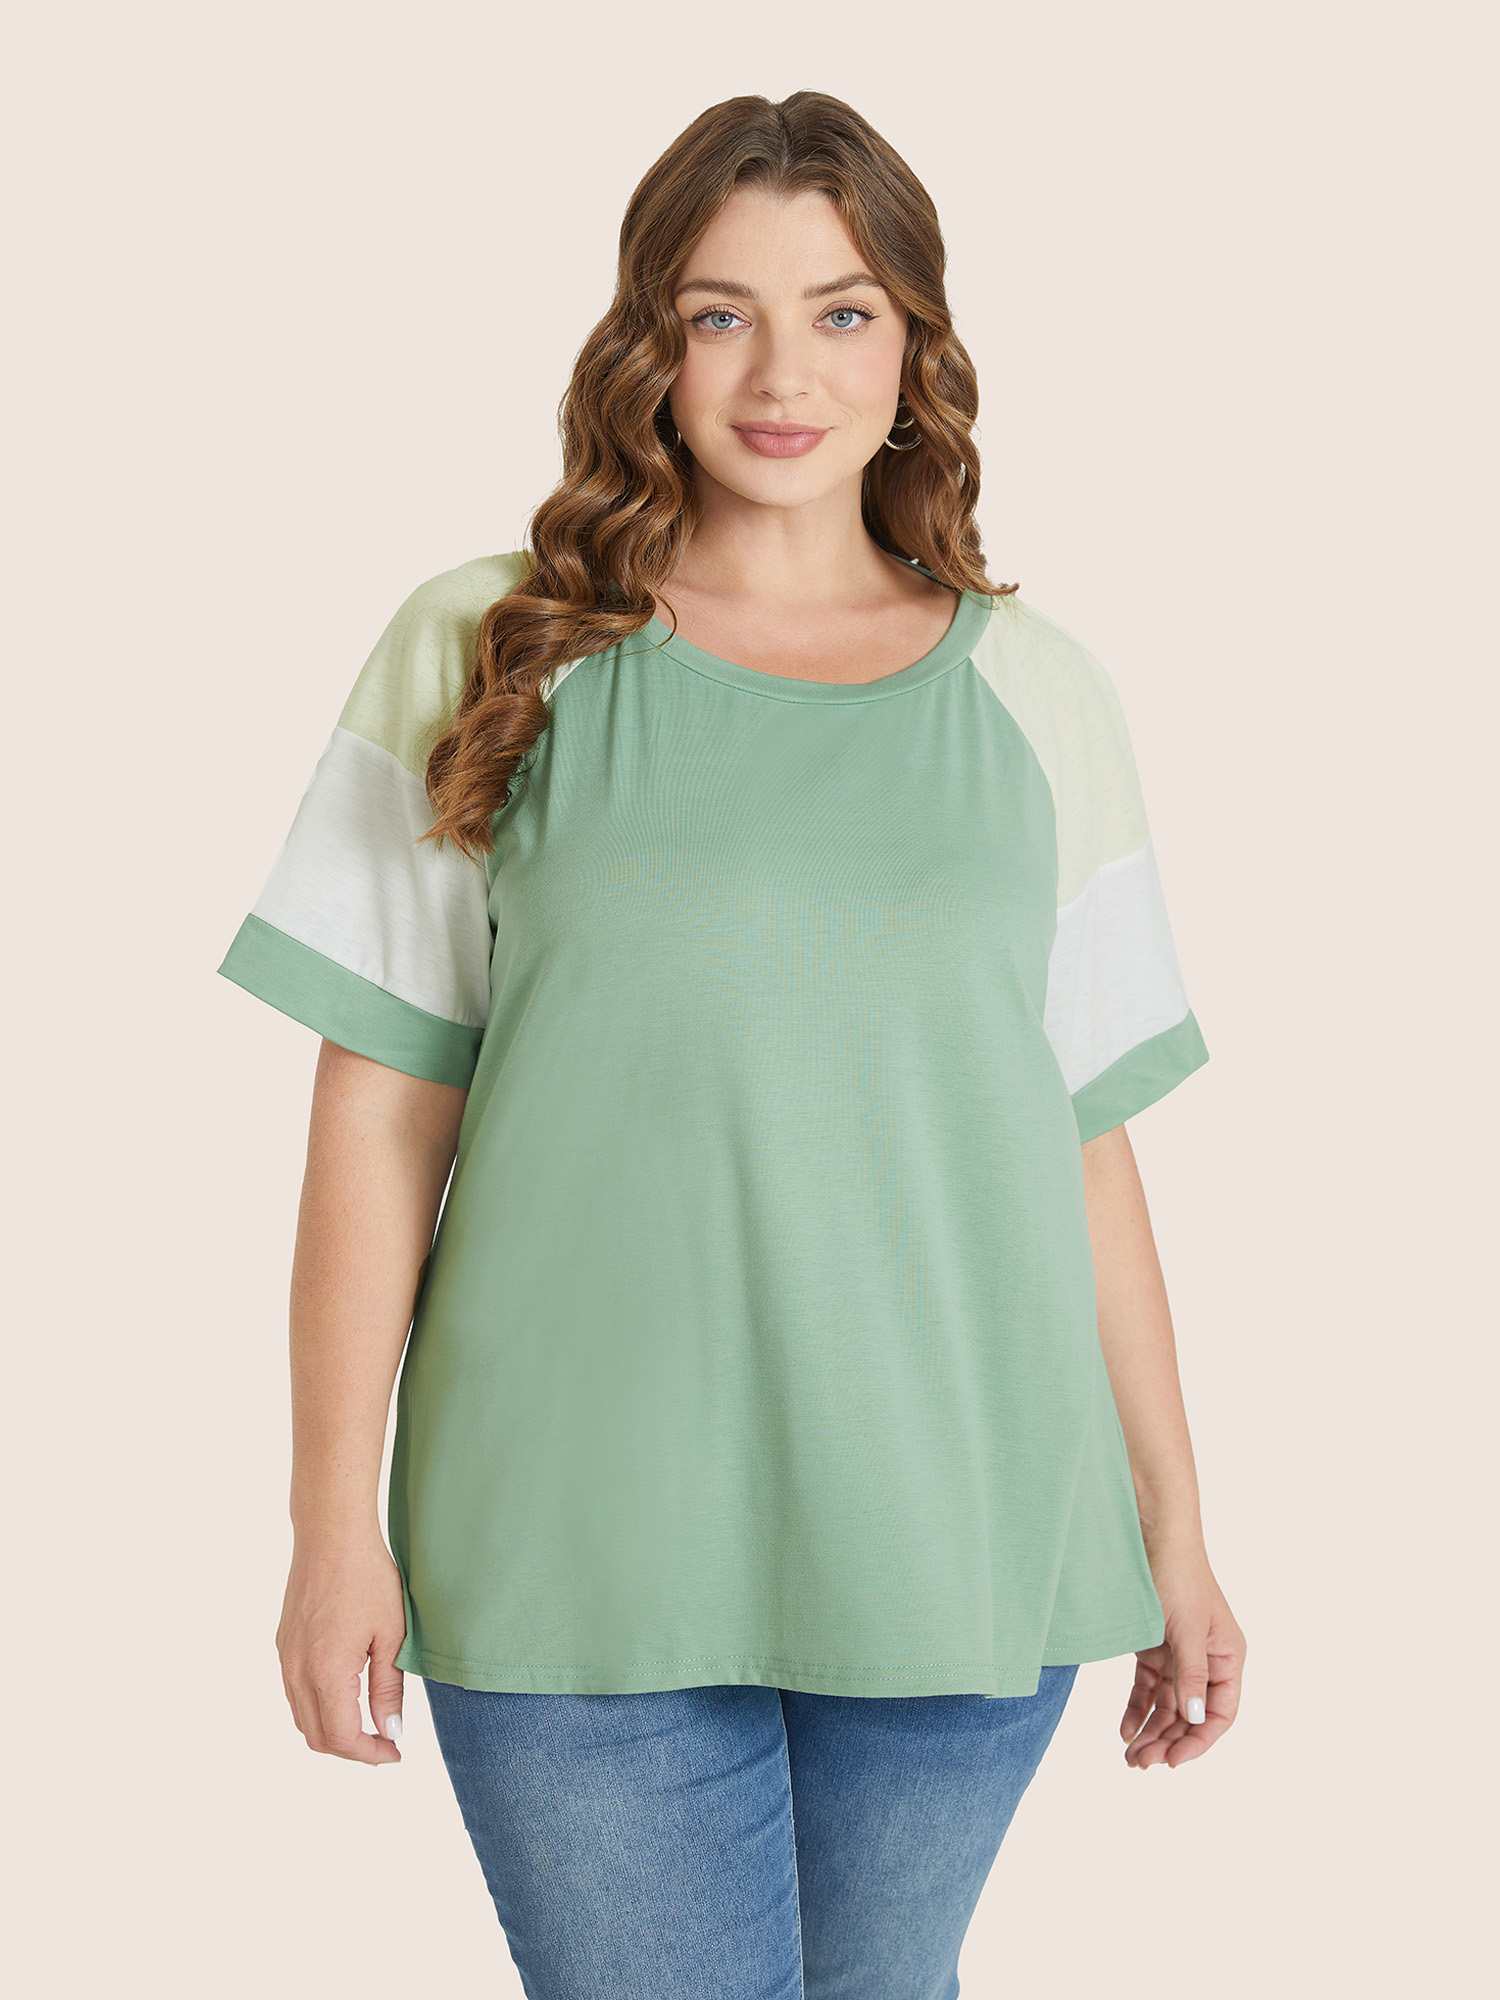 

Plus Size Colorblock Contrast Crew Neck Raglan Sleeve T-shirt Mint Women Casual Contrast Colorblock Round Neck Everyday T-shirts BloomChic